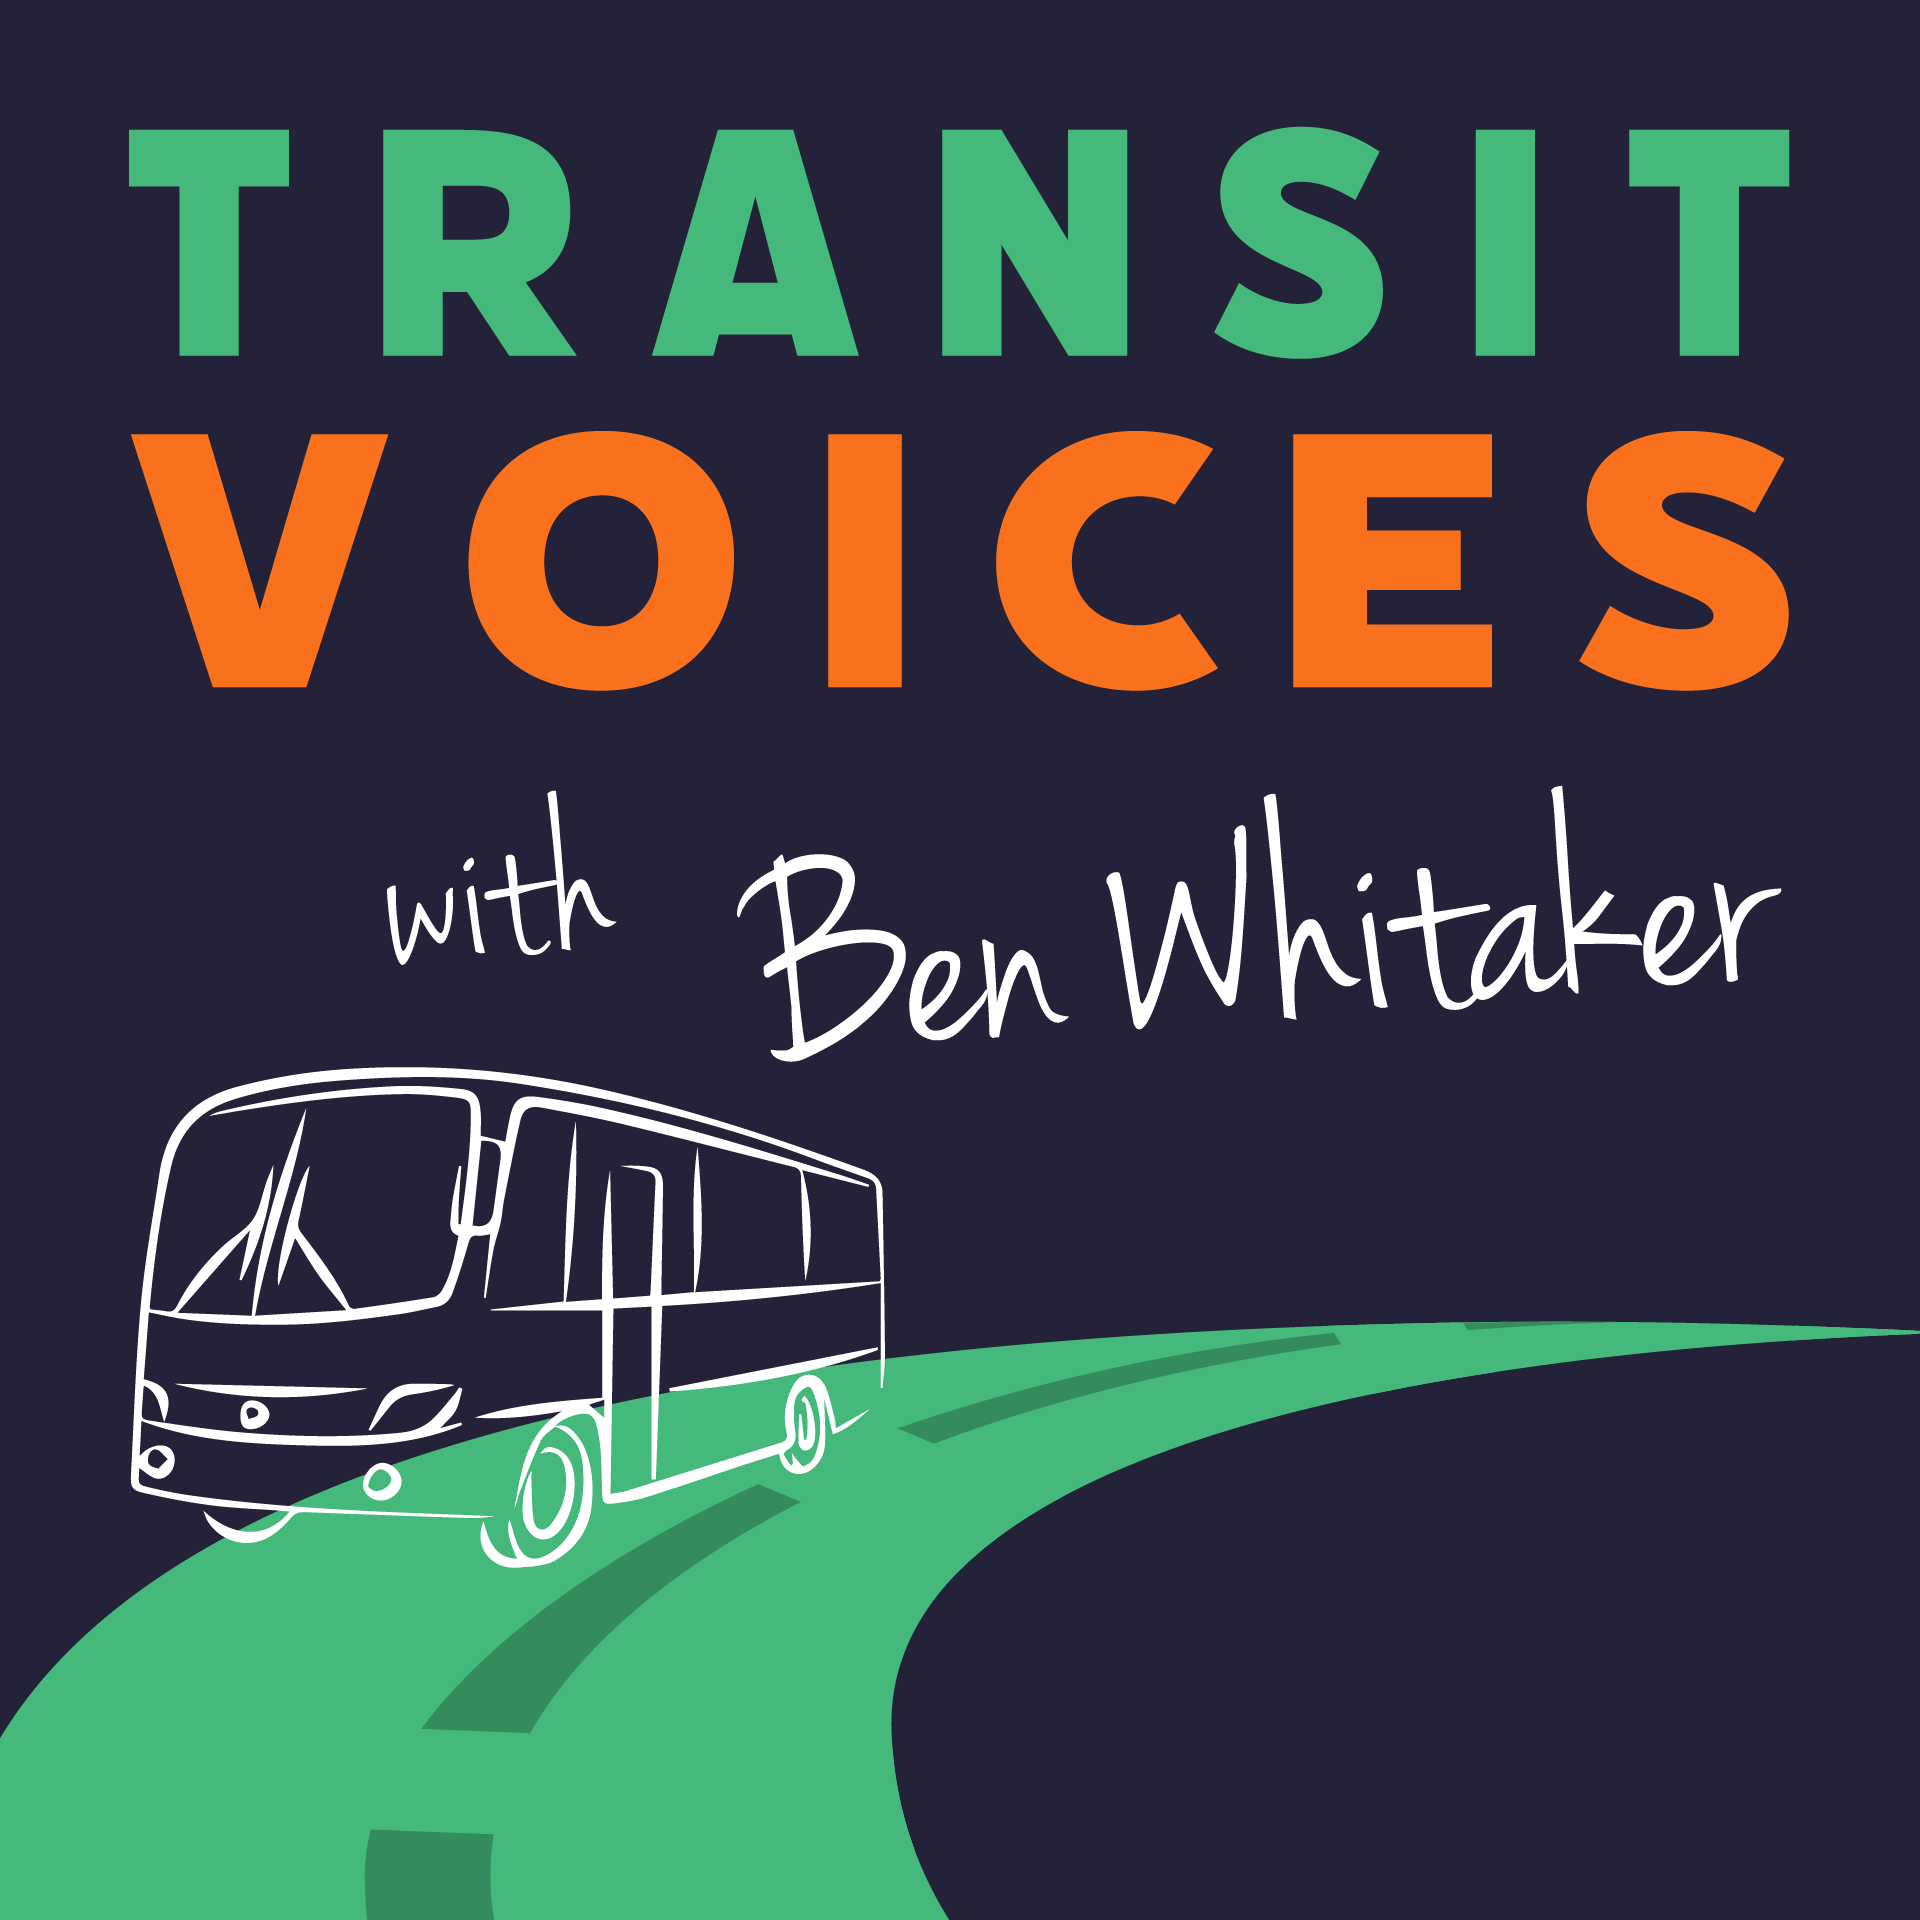 Transit Voices with Ben Whitaker